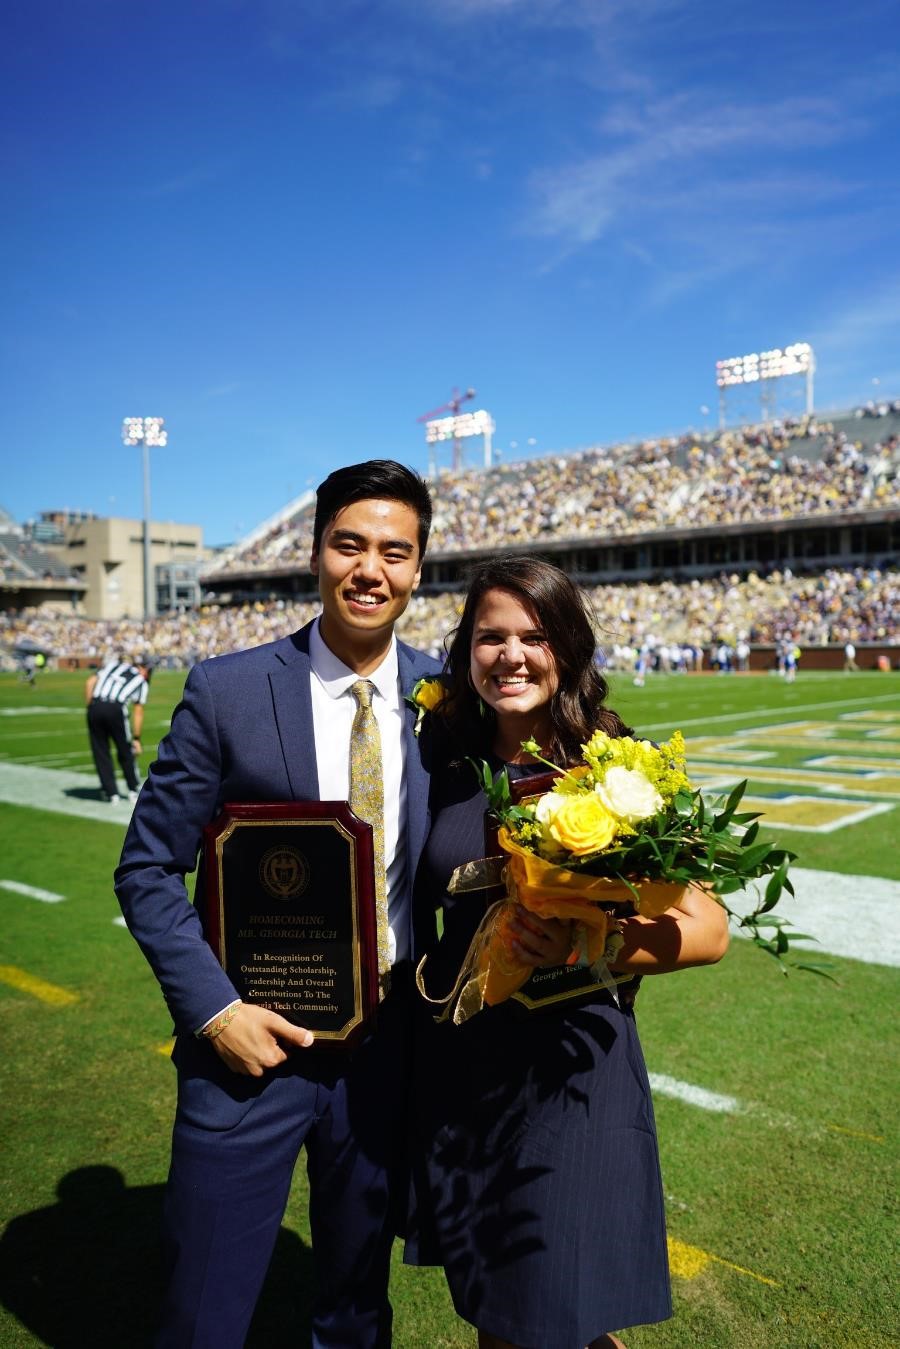 James Ni and Hannah Todd, a pair of Scheller College of Business undergraduate students, were crowned Homecoming 2018 Mr. & Ms. Georgia Tech. (Photo courtesy: James Ni)